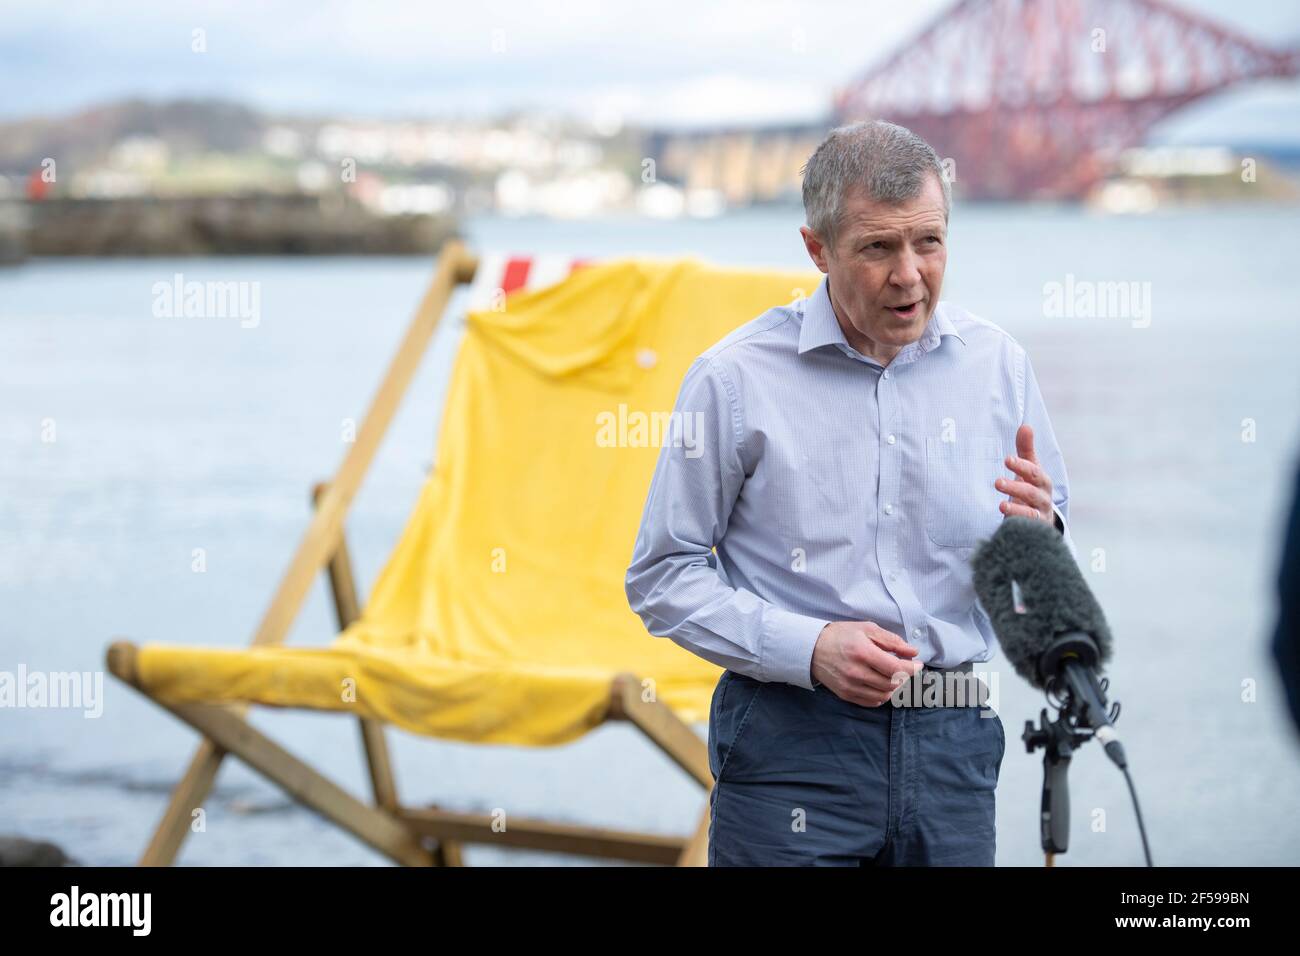 South Queensferry, Scotland, UK. 25th Mar, 2021. PICTURED: Willie Rennie MSP. Willie Rennie MSP - Leader of the Scottish Liberal Democrat Party (Scottish Lib Dems) joined by Edinburgh Northern and Leith candidate, Rebecca Bell and her daughter Daphne. He reads Rebecca's daughter a book on a giant beach chair with the view of the Forth Bridge behind as part of their Holyrood Elections campaign trail for the 6th May. Credit: Colin Fisher/Alamy Live News Stock Photo